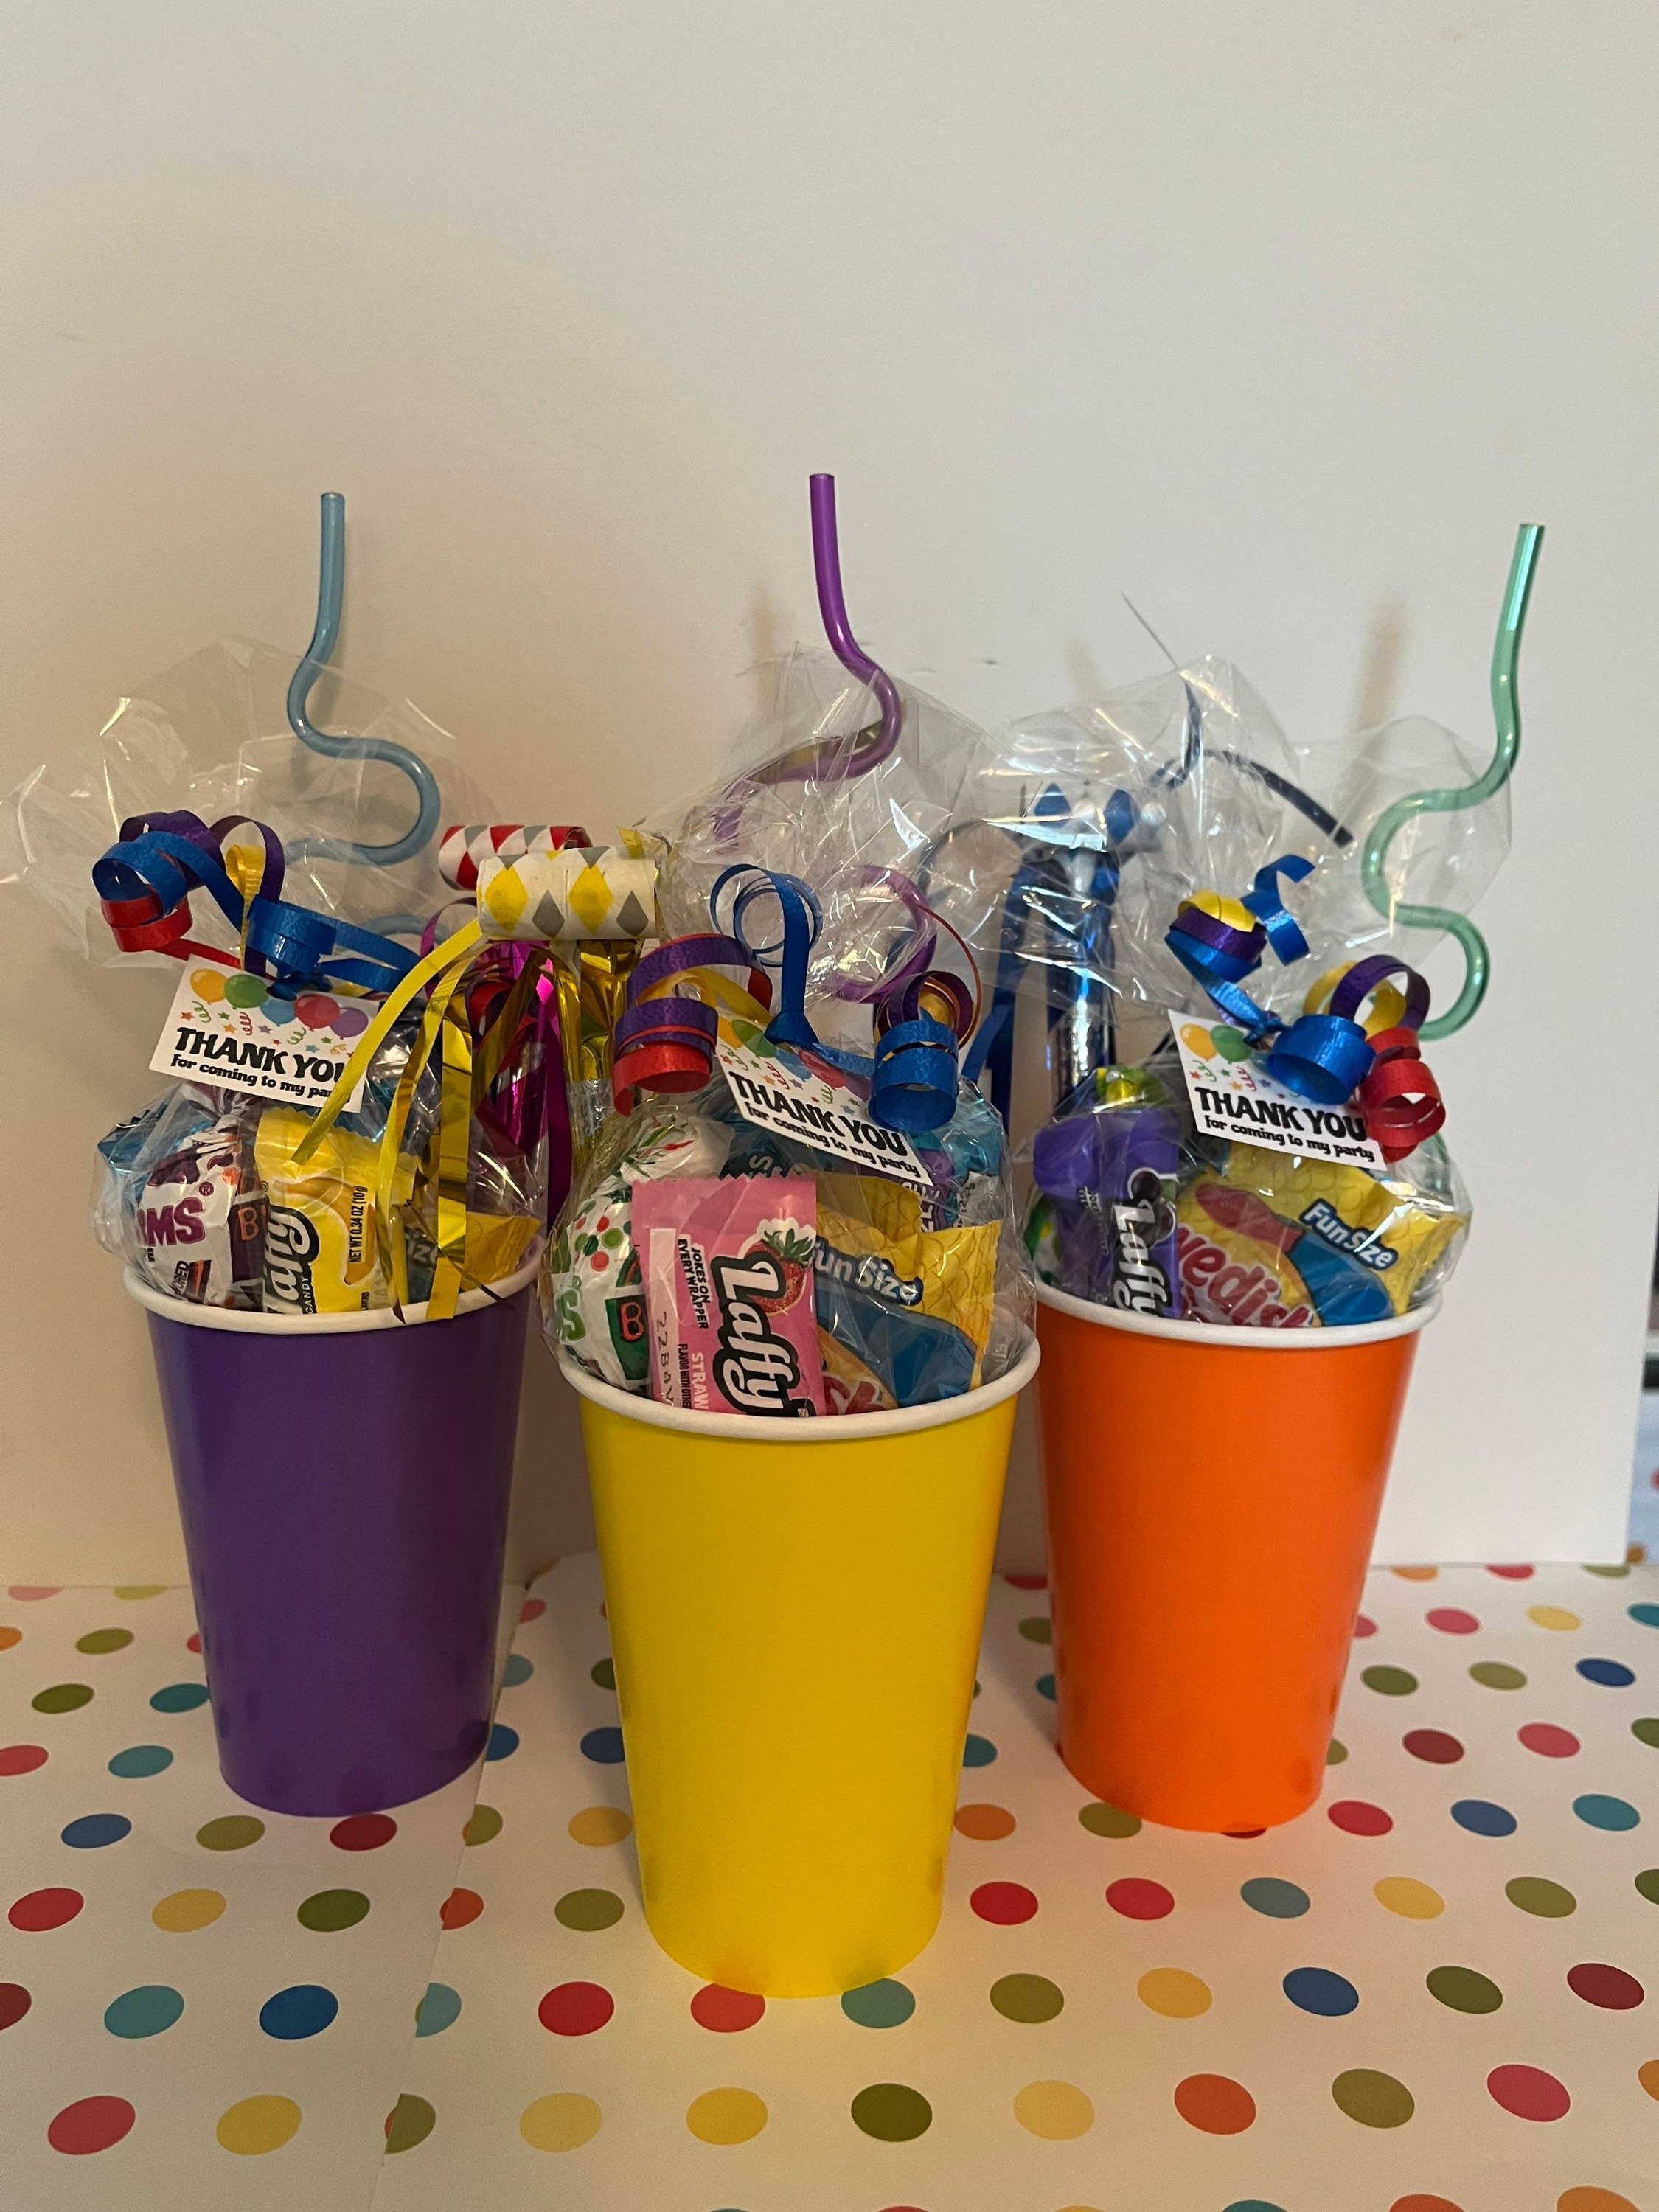 6 tips for the best birthday party goodie bags - Chicago Parent